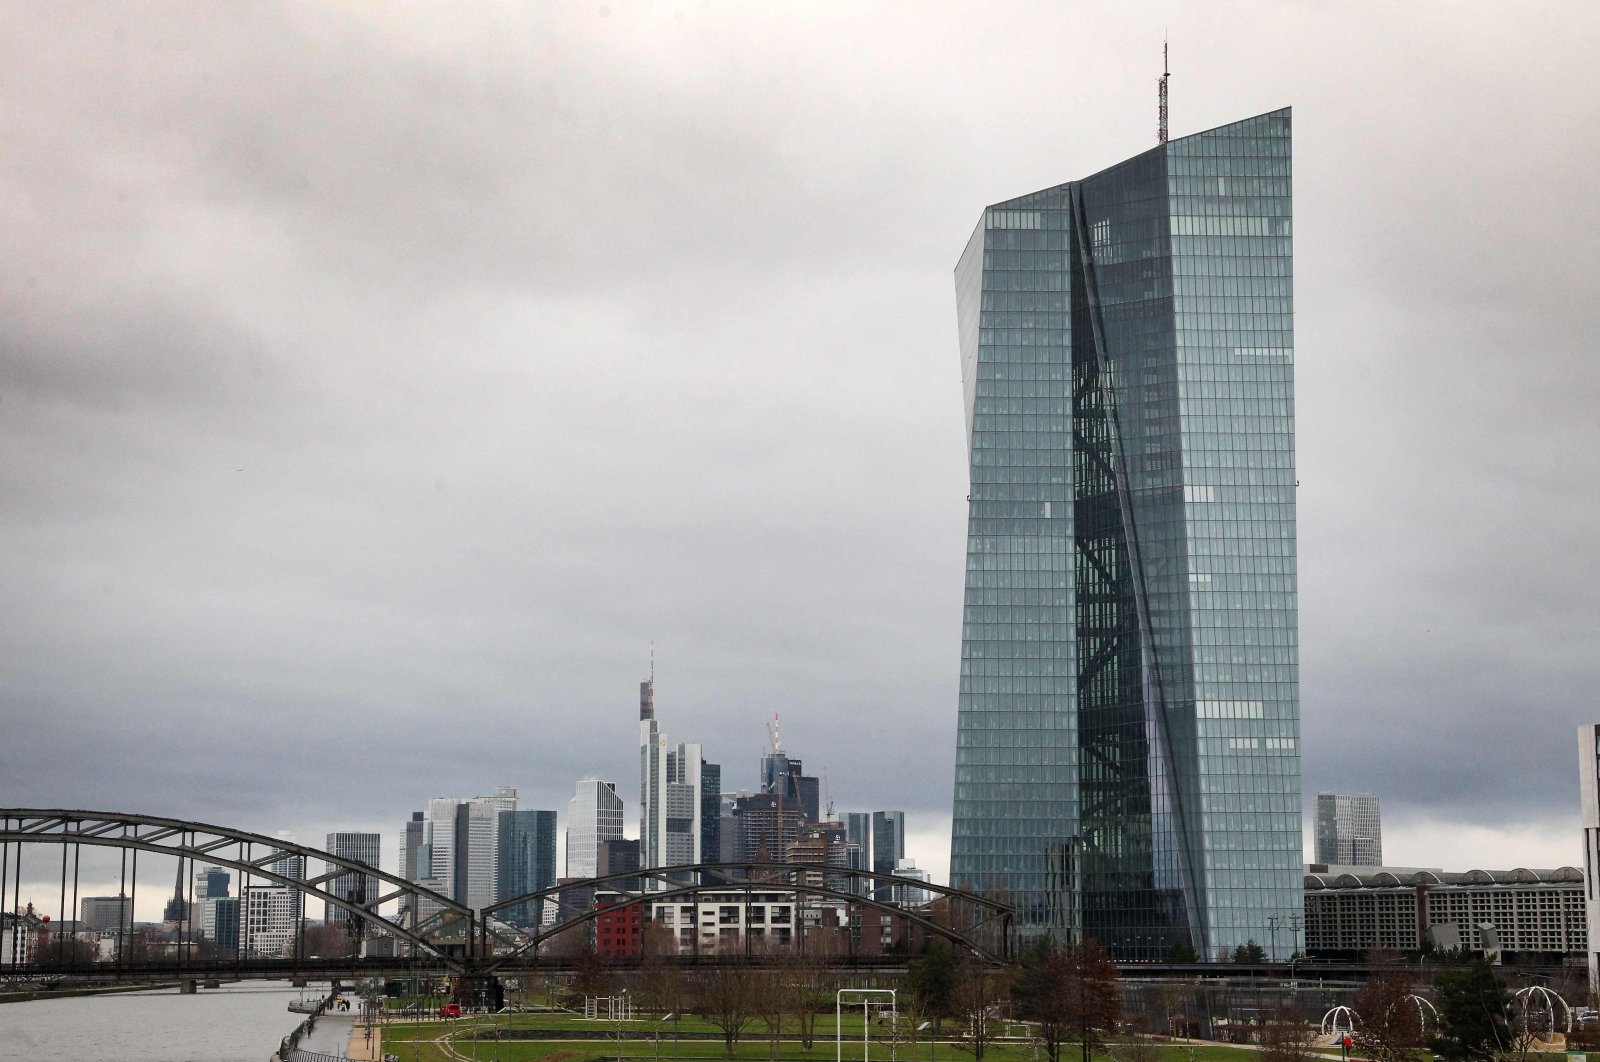 The European Central Bank (ECB) headquarters building is pictured in the cityscape ahead of the start of the press conference on the eurozone&#039;s monetary policy following the meeting of the governing council of the ECB in Frankfurt am Main, western Germany, Feb. 2, 2023. (AFP Photo)